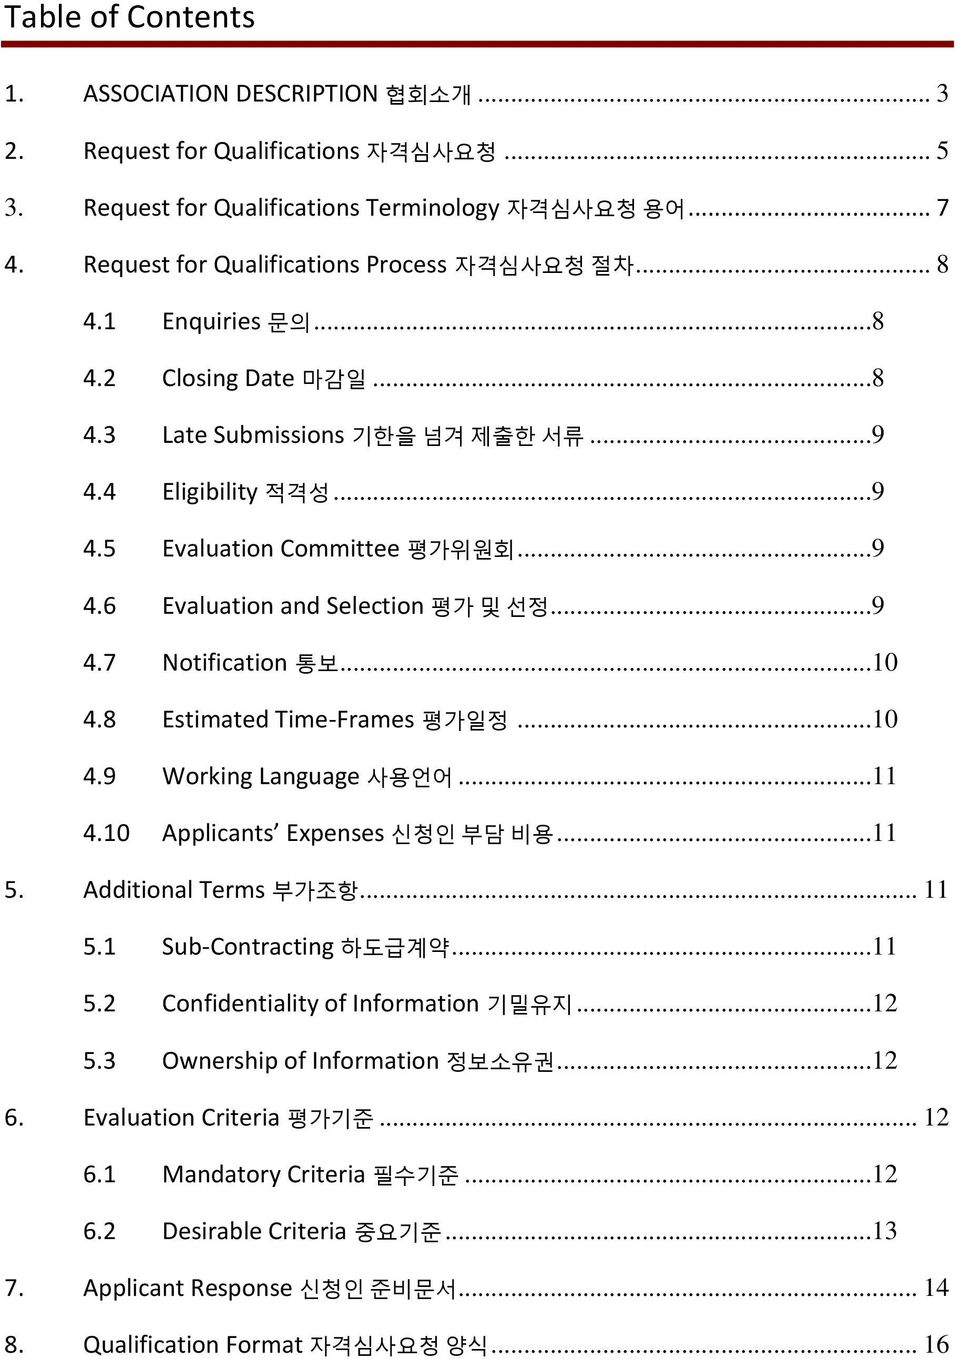 ..9 4.7 Notification 통보...10 4.8 Estimated Time-Frames 평가일정...10 4.9 Working Language 사용언어...11 4.10 Applicants Expenses 신청인 부담 비용...11 5. Additional Terms 부가조항... 11 5.1 Sub-Contracting 하도급계약...11 5.2 Confidentiality of Information 기밀유지.